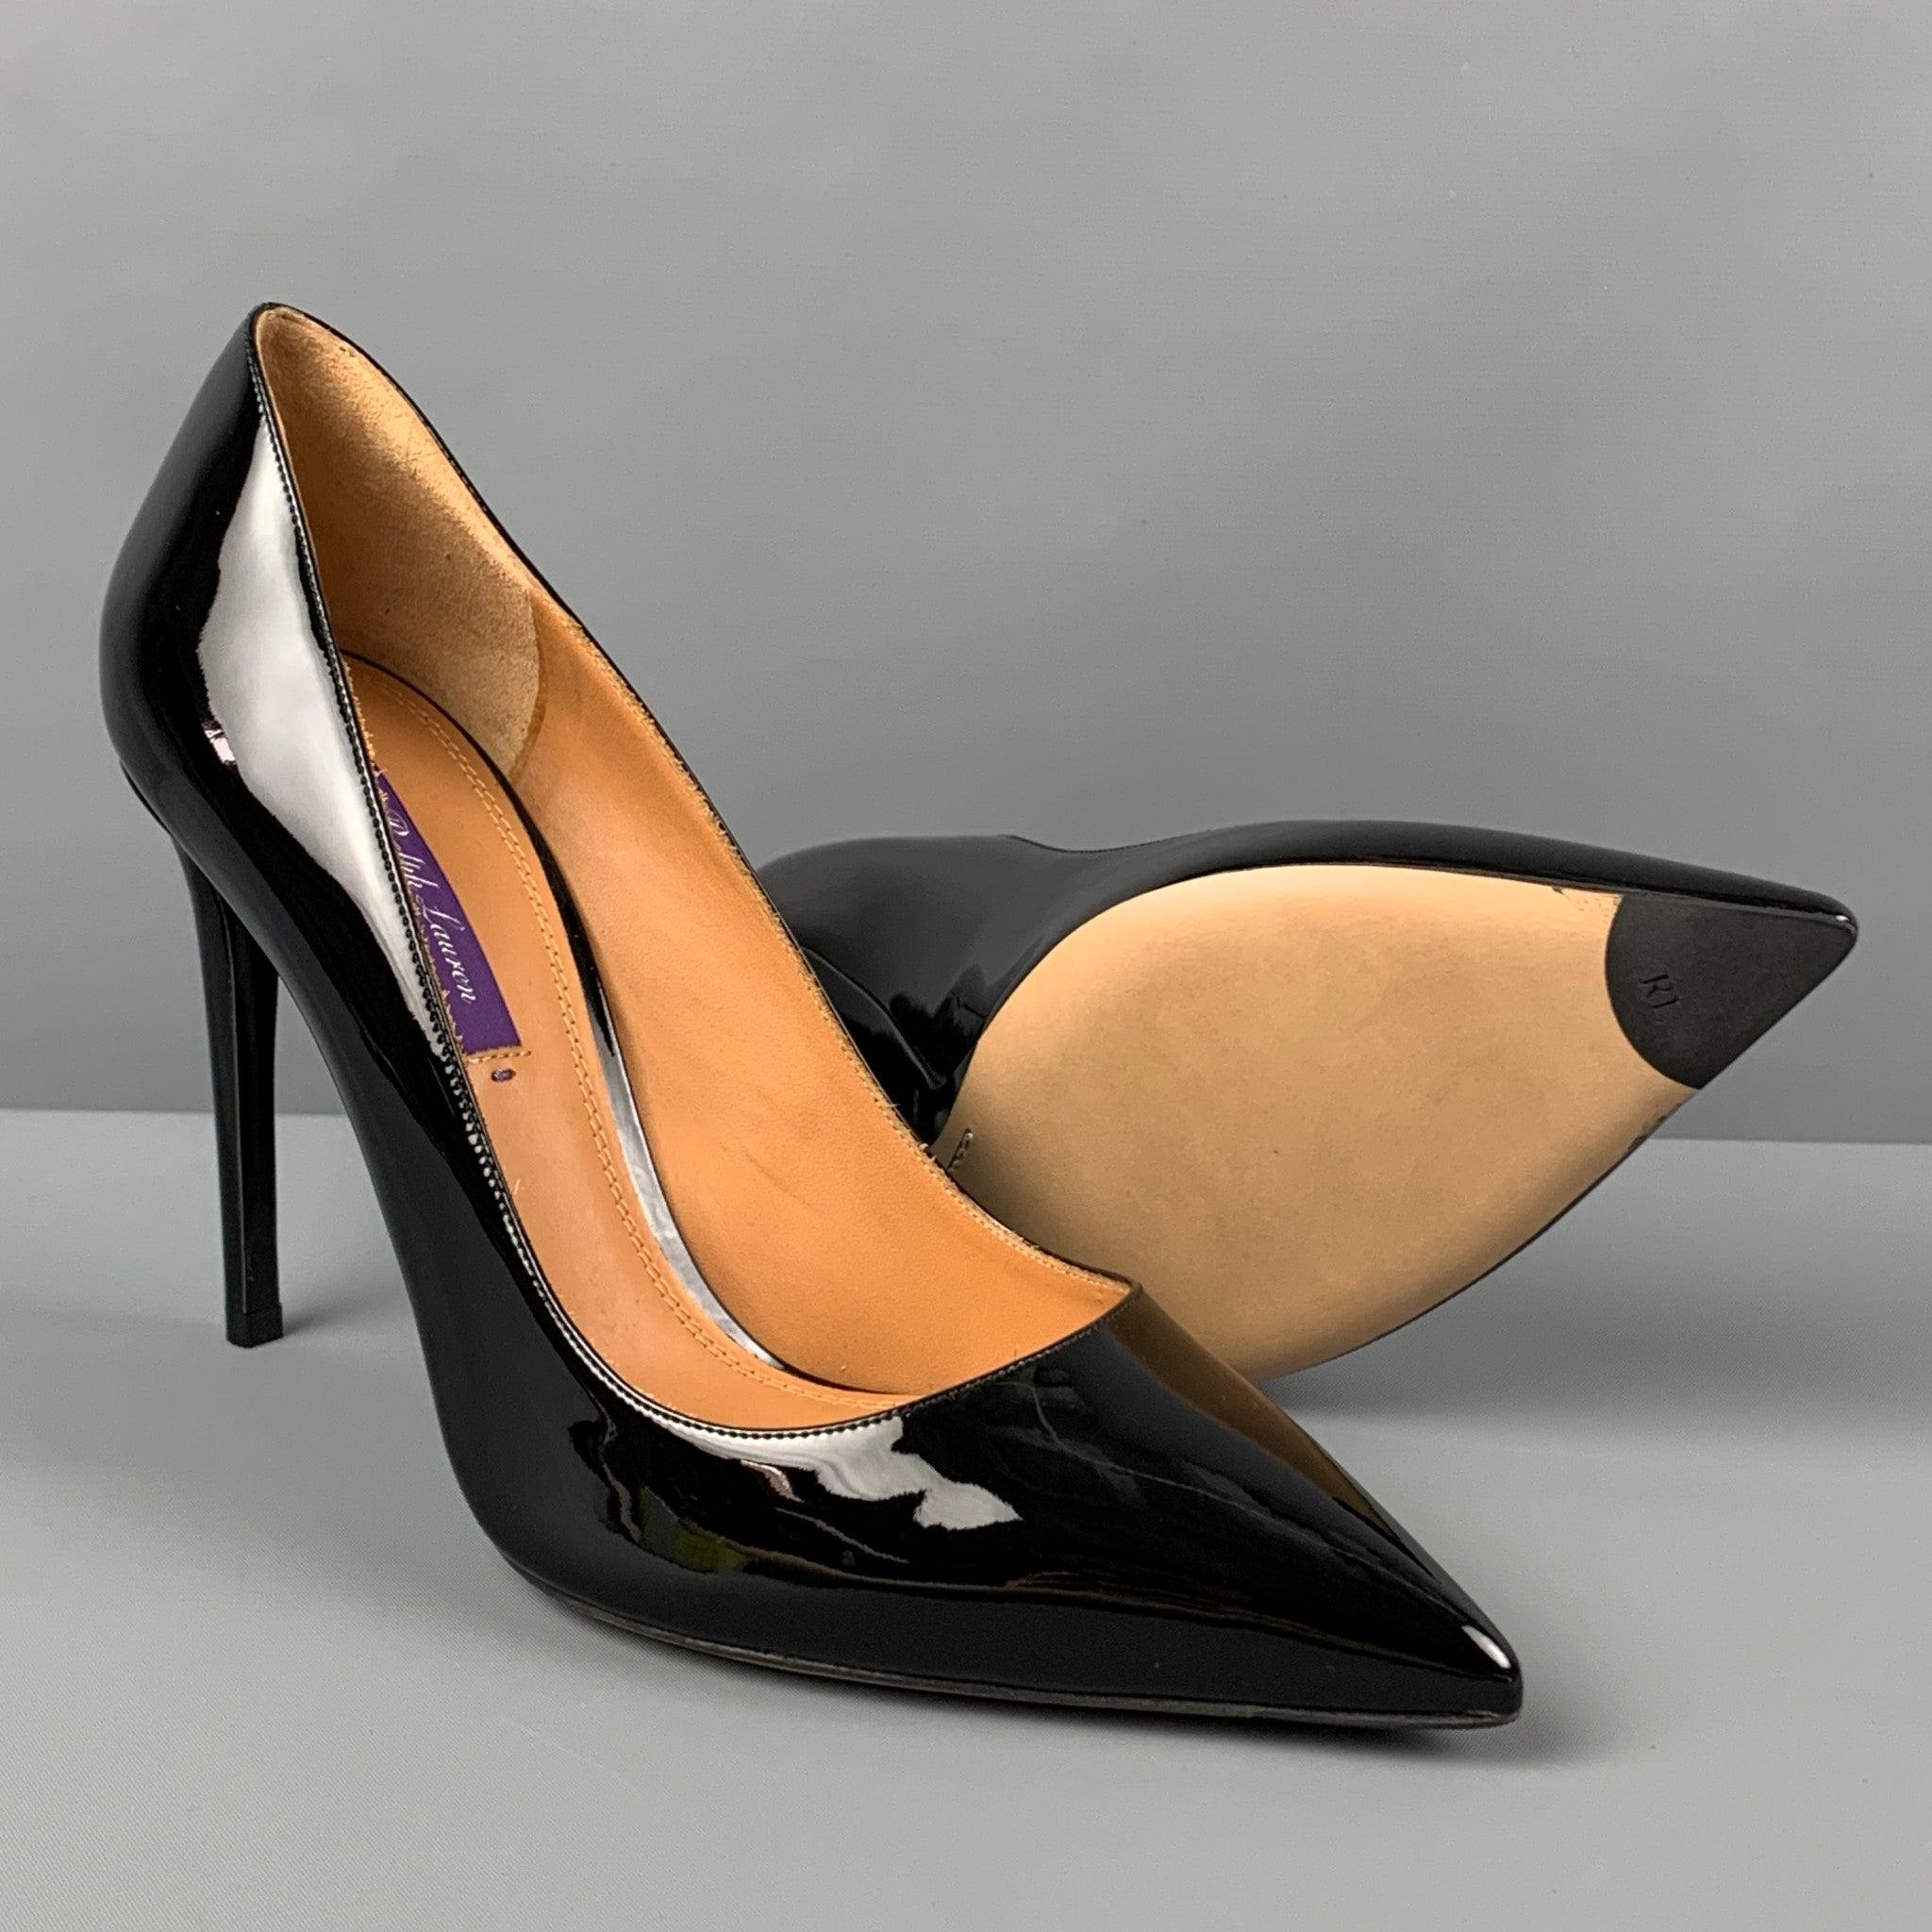 RALPH LAUREN Size 9.5 Black Leather Patent Leather Stiletto Celia Pumps In Good Condition For Sale In San Francisco, CA